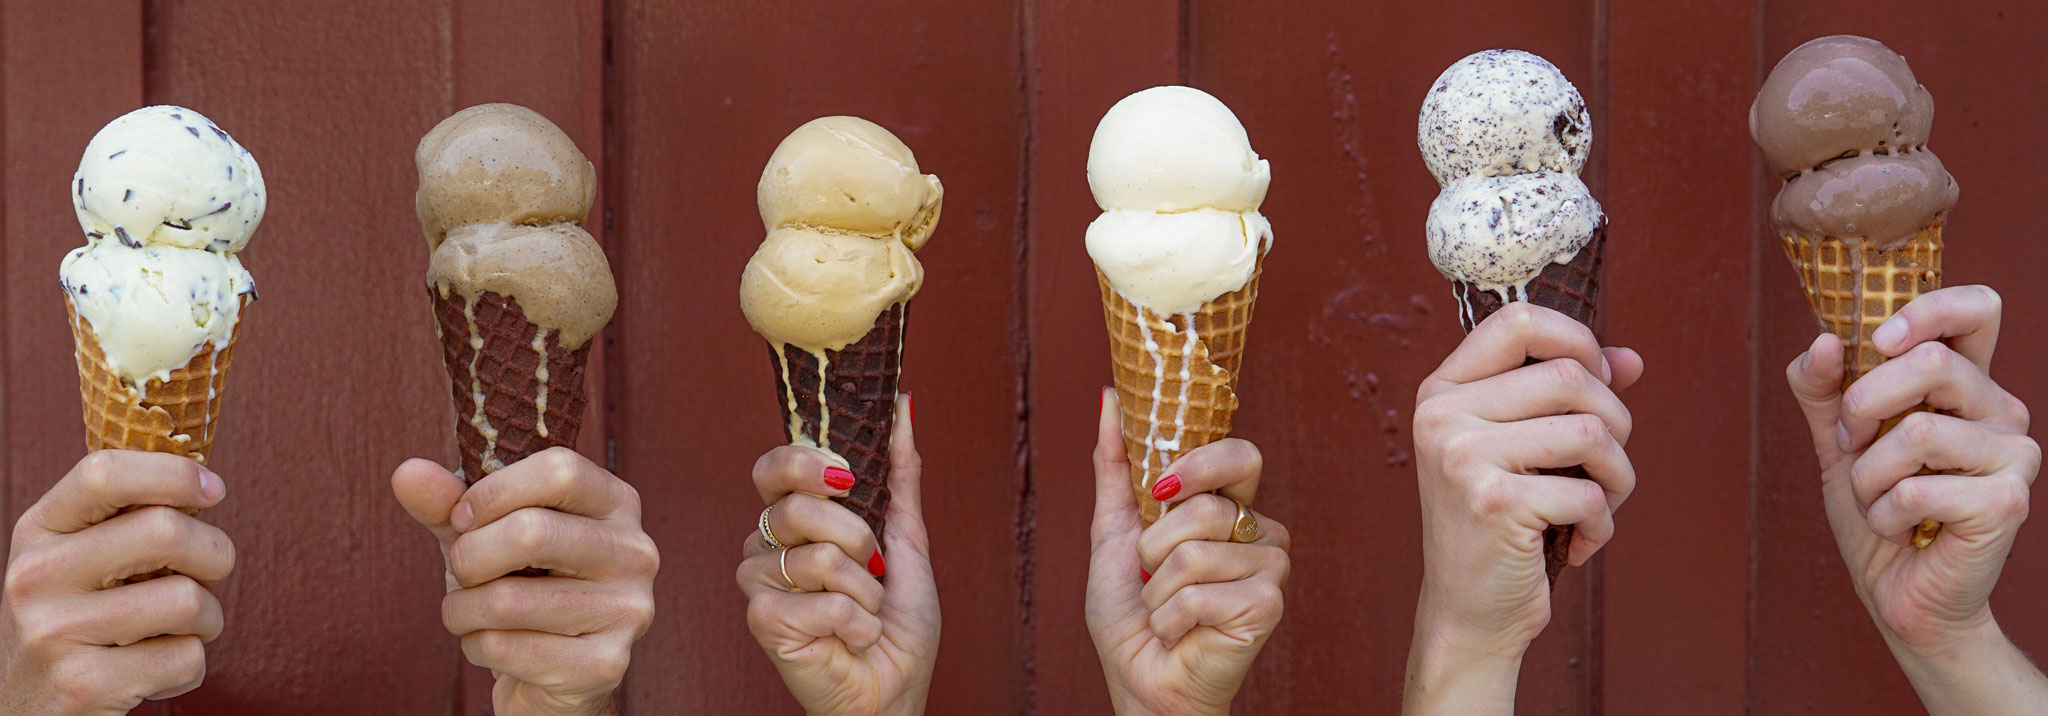 Hands holding a variety of ice cream cones